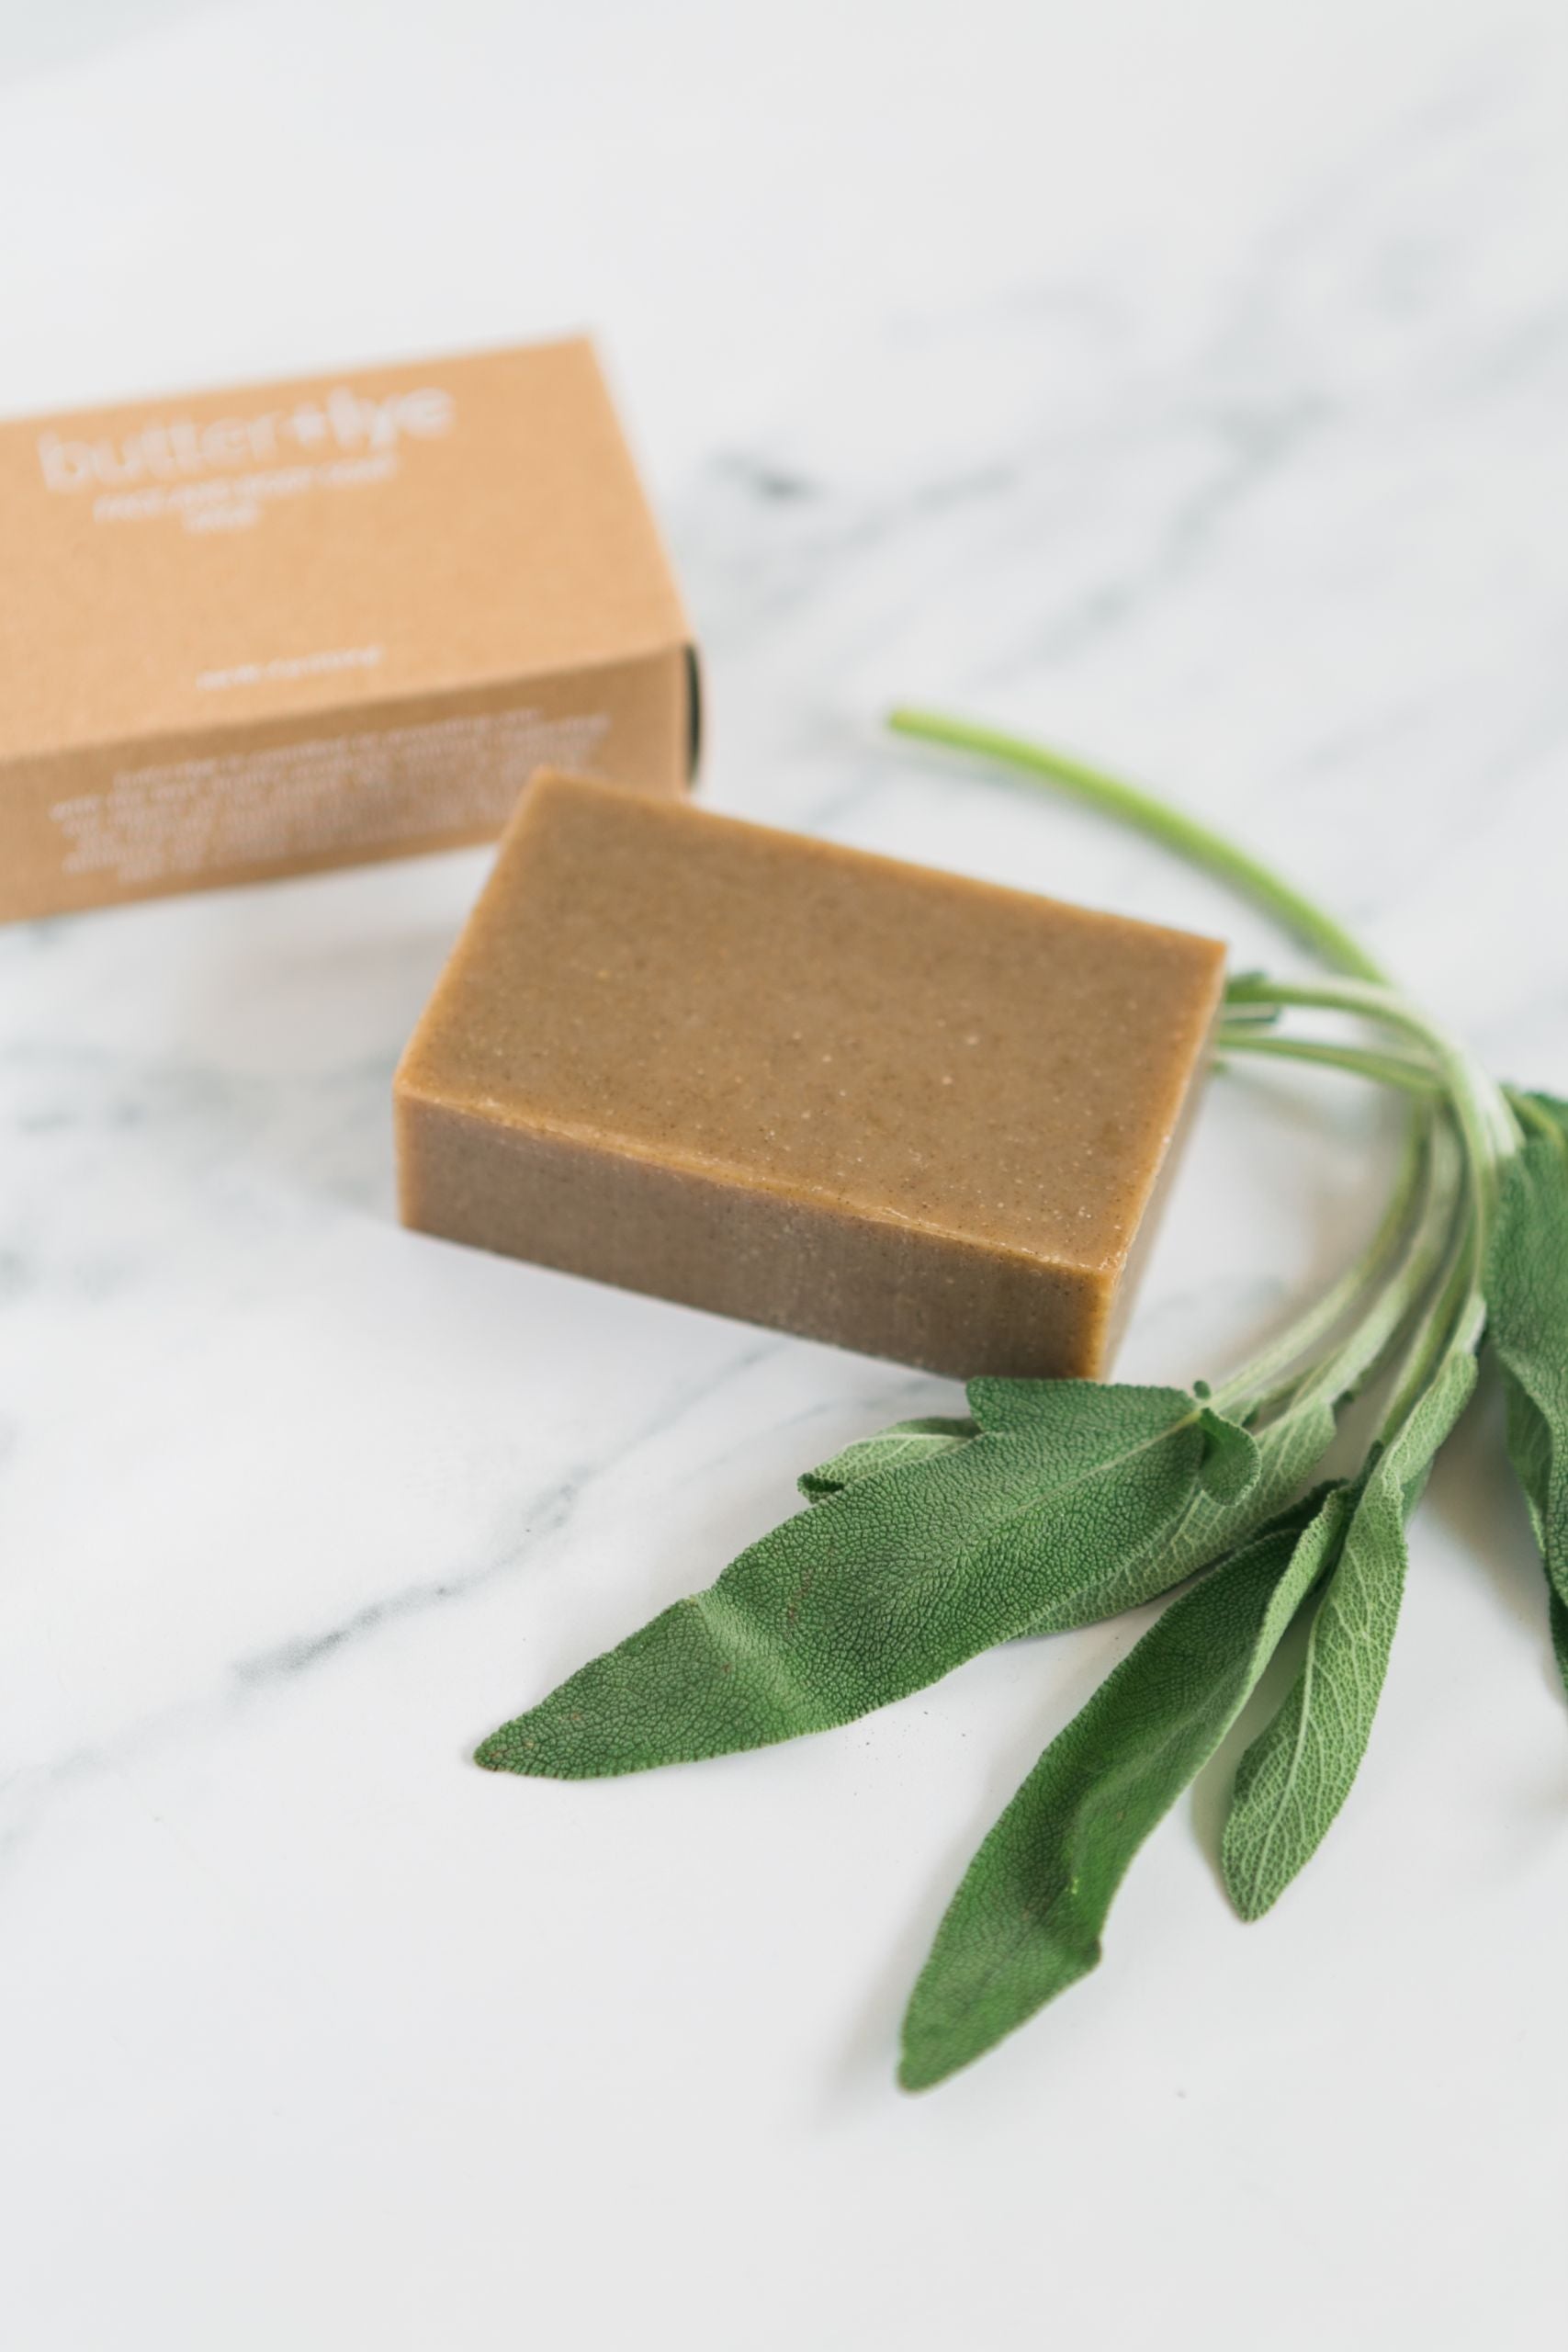 Vegan Face and Body Soaps